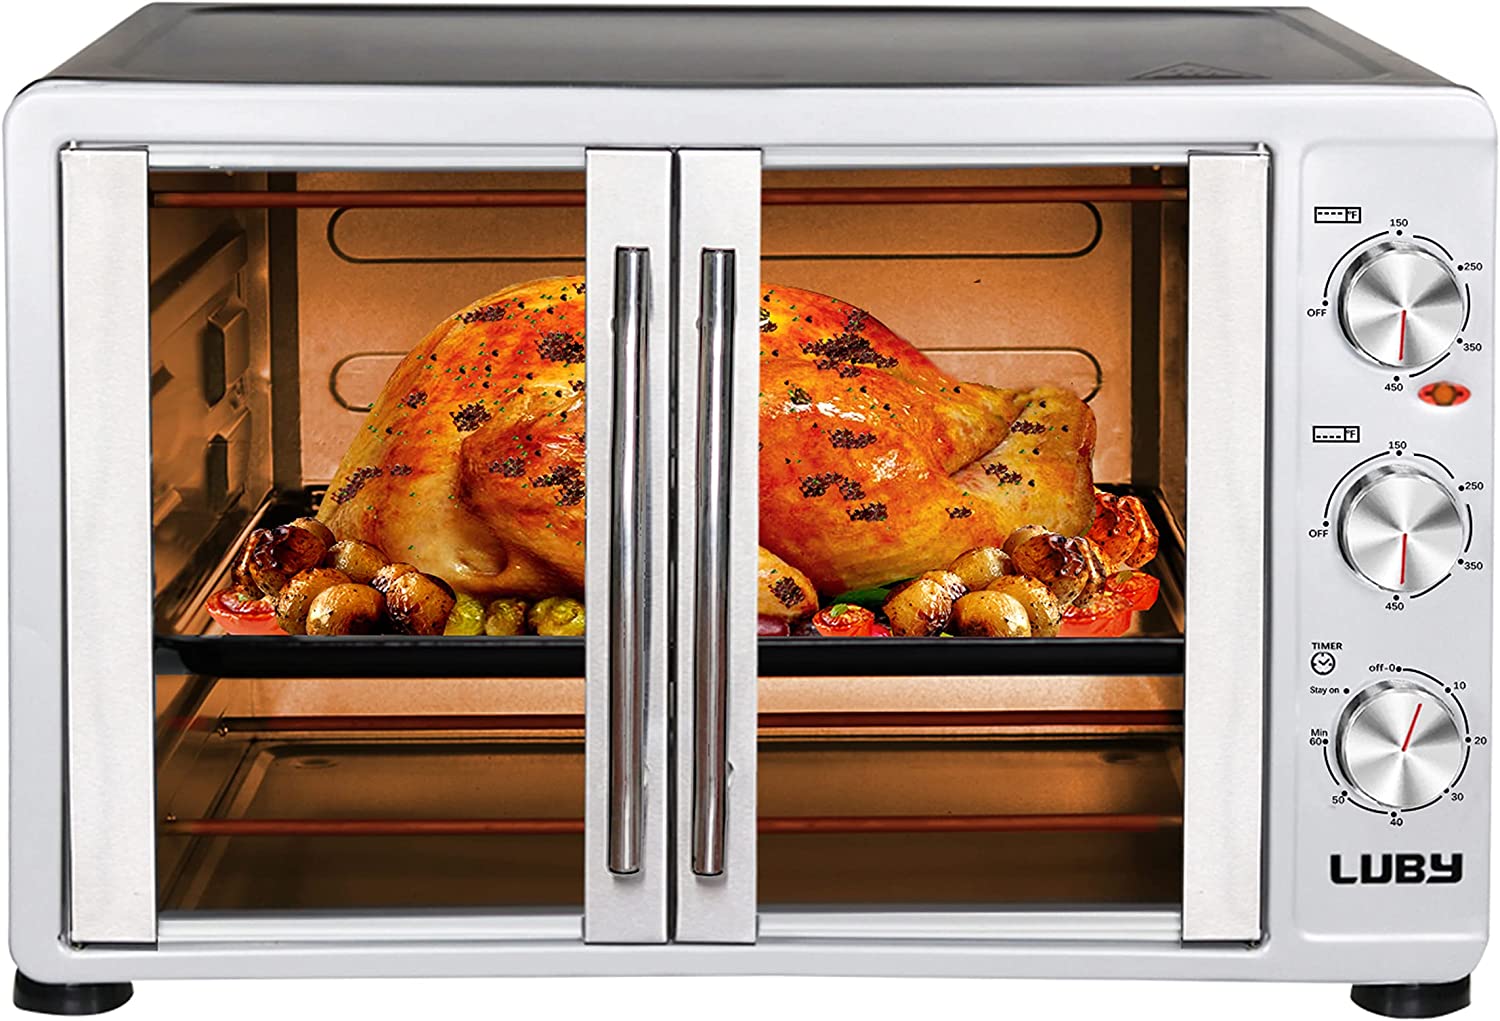 LUBY Large Toaster Oven Countertop, French Door [...]